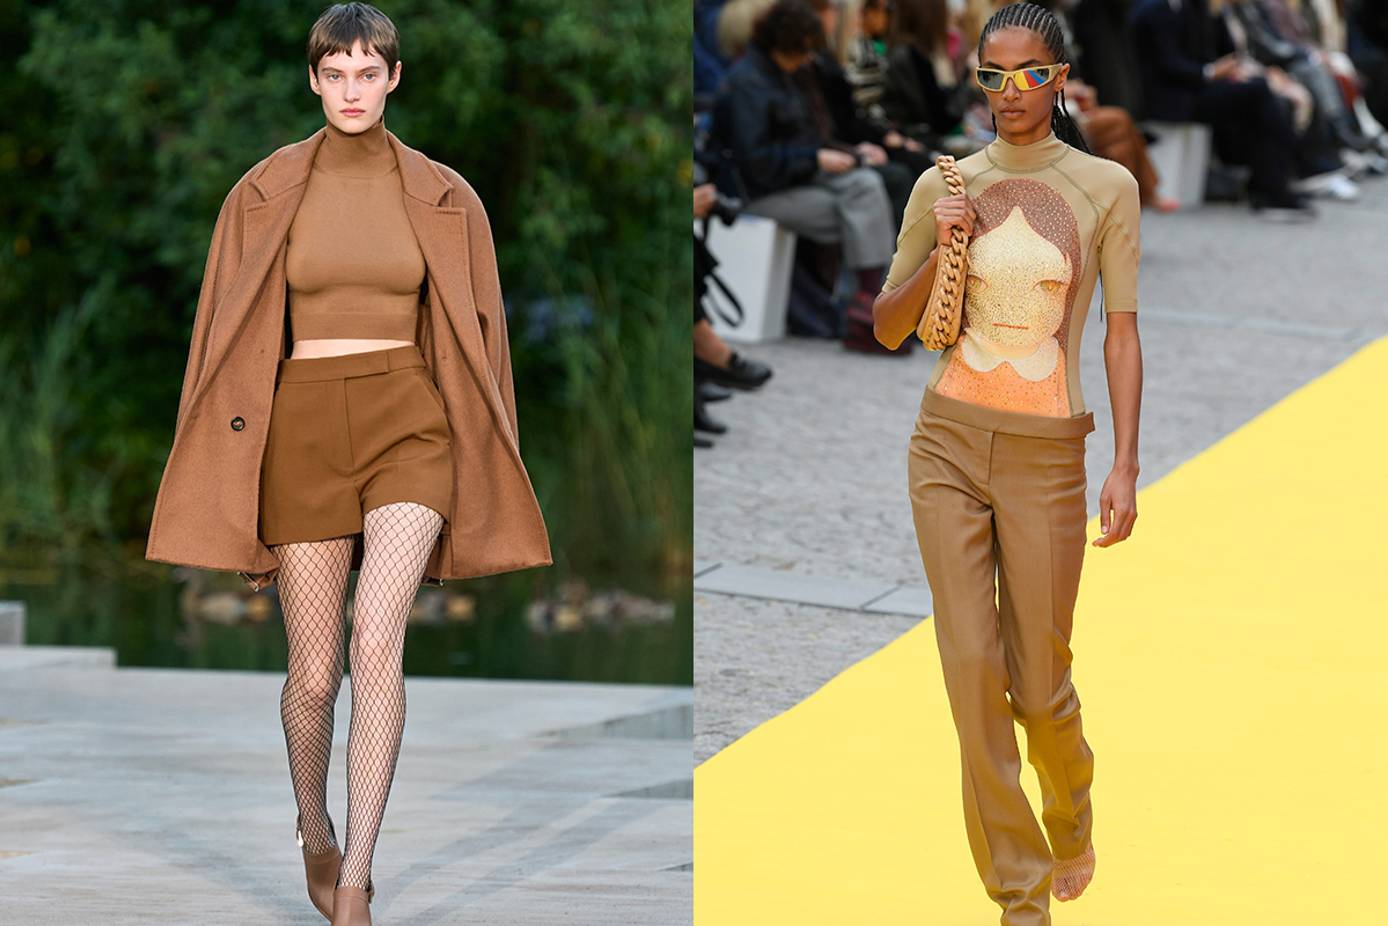 Michael Kors Collection's Tonal FW'22 Show Was Anything But Beige